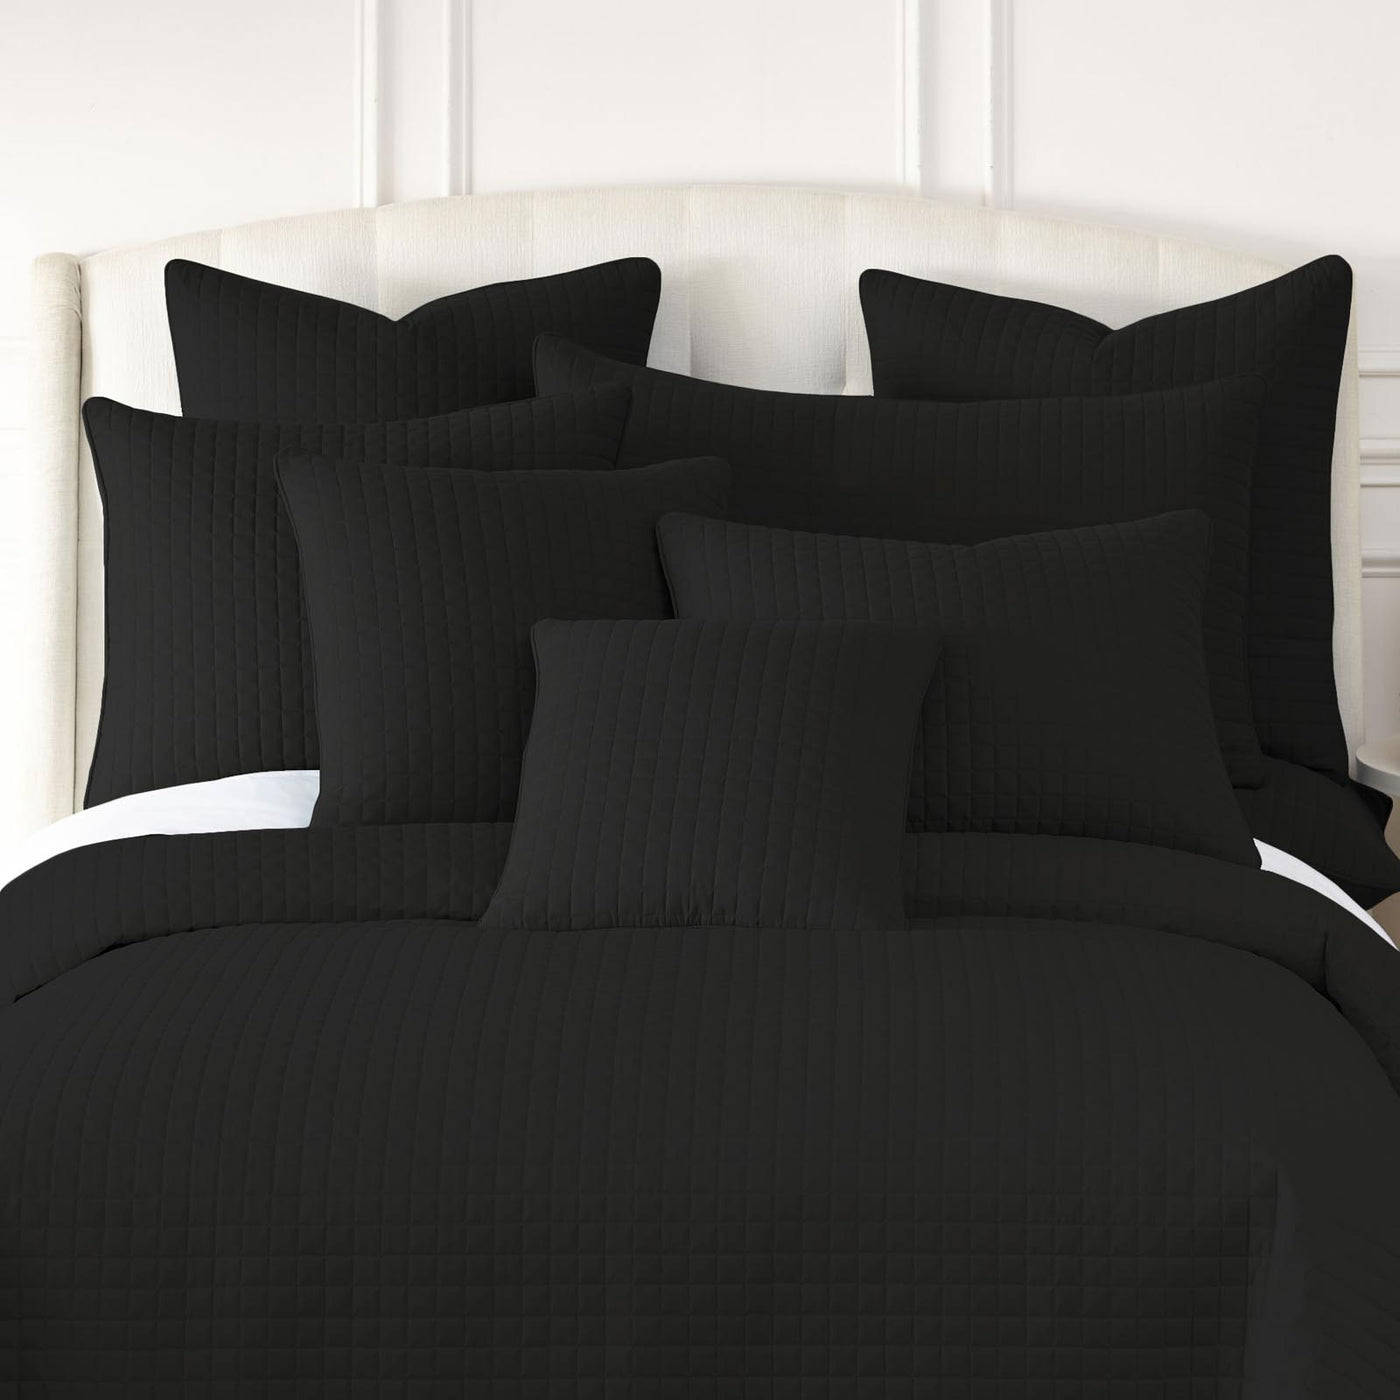 110 GSM Microfiber Qulilted shams in multiple sizes in black